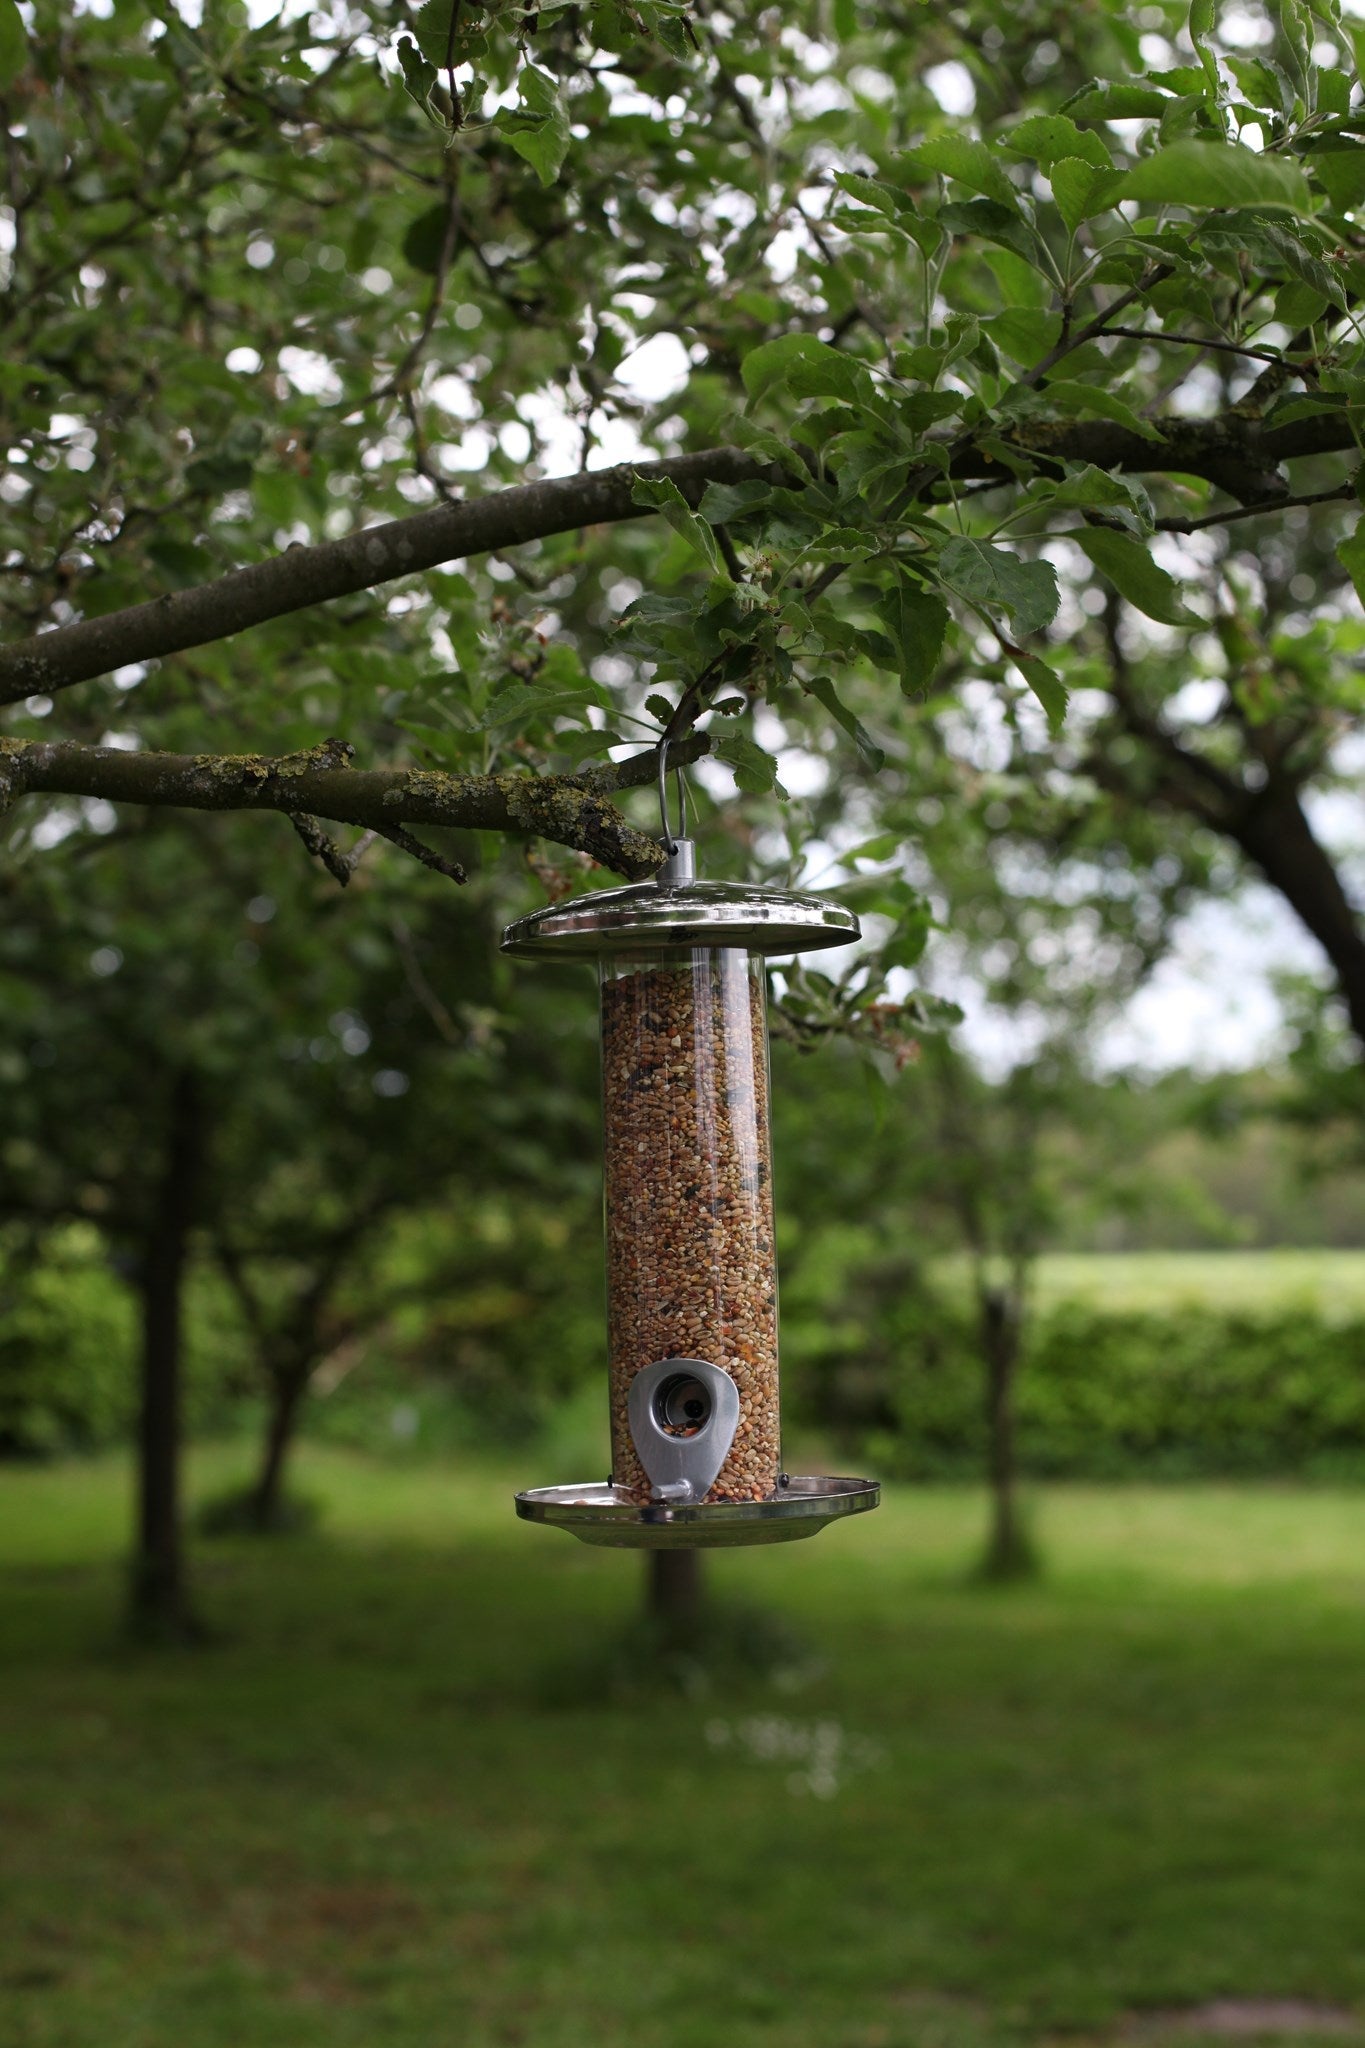 Stainless Steel Seed Feeder, Excl. Bird Food